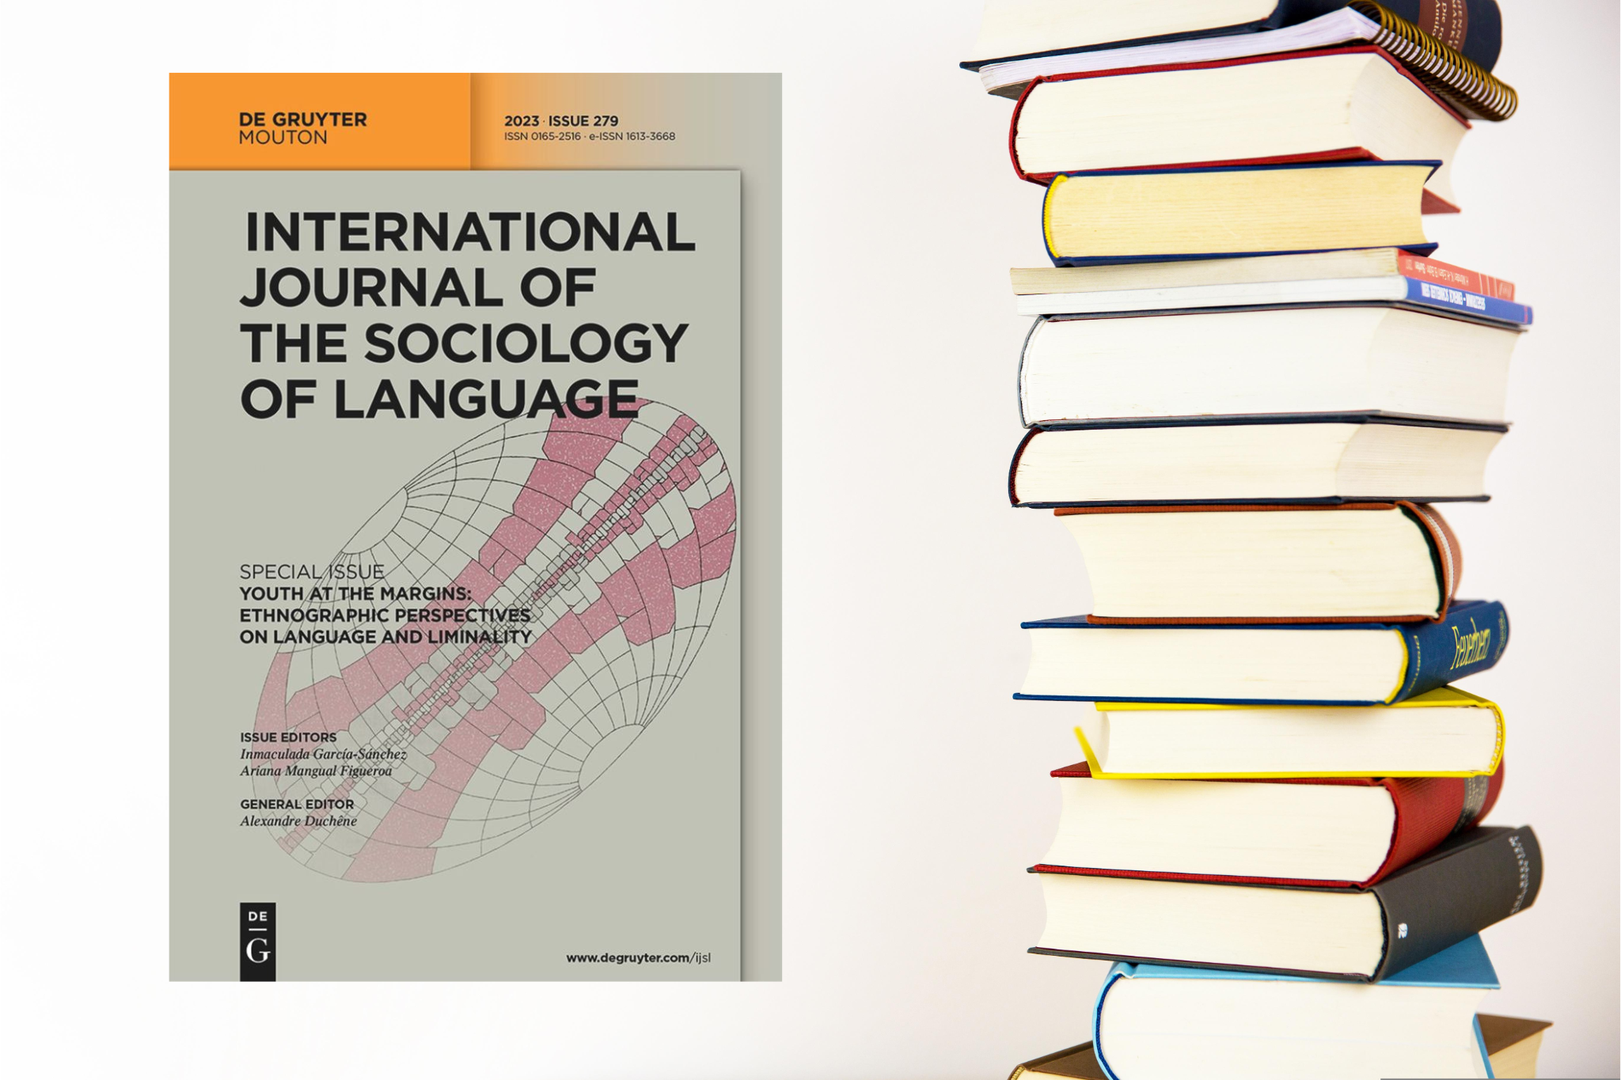 Bruns, H. (2023). “That’s all it takes to be trans”: Counter-strategies to hetero- and transnormative discourse on YouTube. International Journal of the Sociology of Language, 283, 53-76